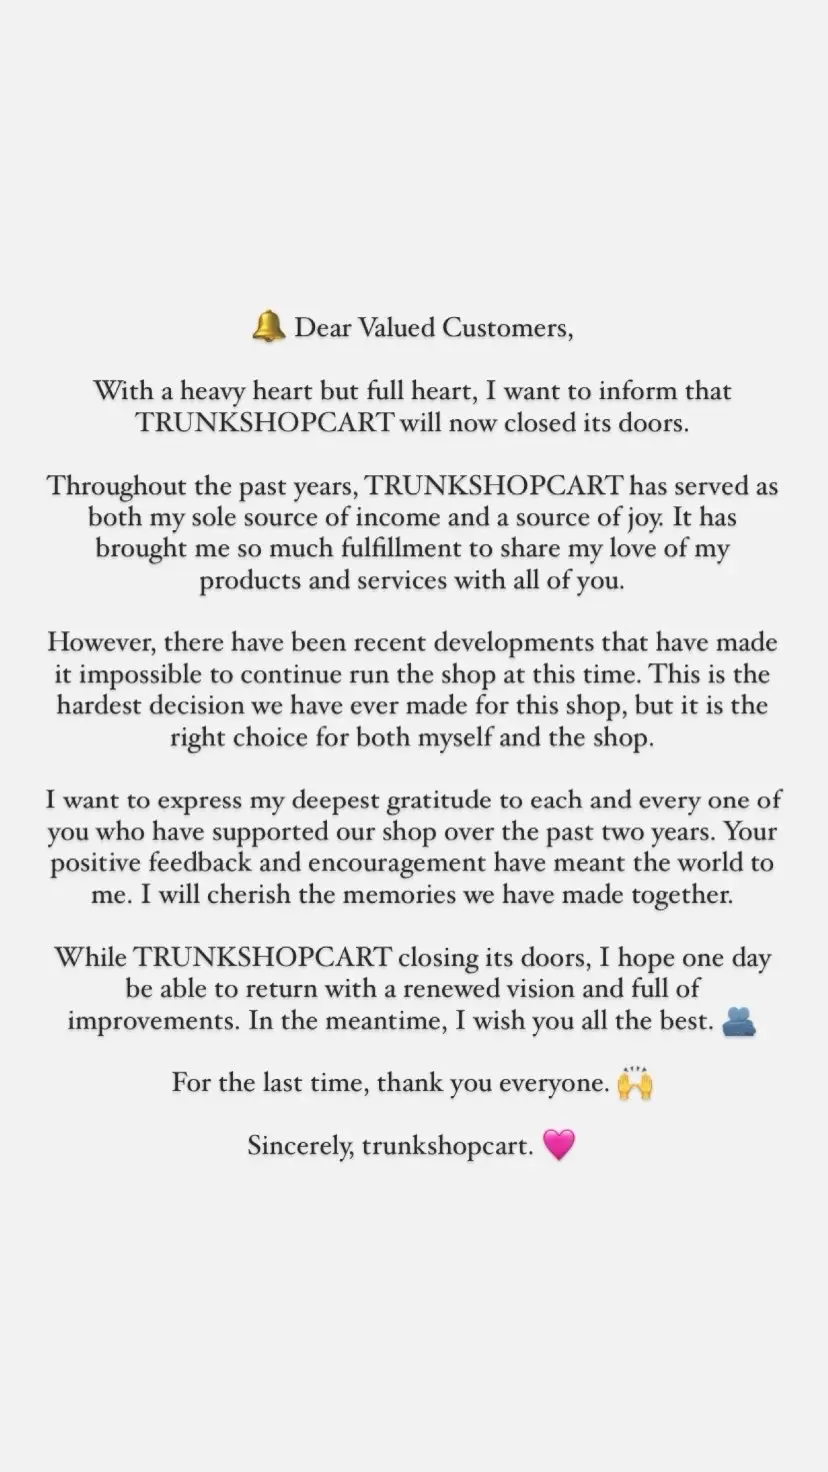 🔔 Dear Valued Customers, With a heavy heart but full heart, I want to inform that TRUNKSHOPCART will now closed its doors. Throughout the past years, TRUNKSHOPCART has served as both my sole source of income and a source of joy. It has brought me so much fulfillment to share my love of my products and services with all of you. However, there have been recent developments that have made it impossible to continue run the shop at this time. This is the hardest decision we have ever made for this shop, but it is the right choice for both myself and the shop. I want to express my deepest gratitude to each and every one of you who have supported our shop over the past two years. Your positive feedback and encouragement have meant the world to me. I will cherish the memories we have made together. While TRUNKSHOPCART closing its doors, I hope one day be able to return with a renewed vision and full of improvements. In the meantime, I wish you all the best. 🫂 For the last time, thank you everyone. 🙌 Sincerely, trunkshopcart. 🩷